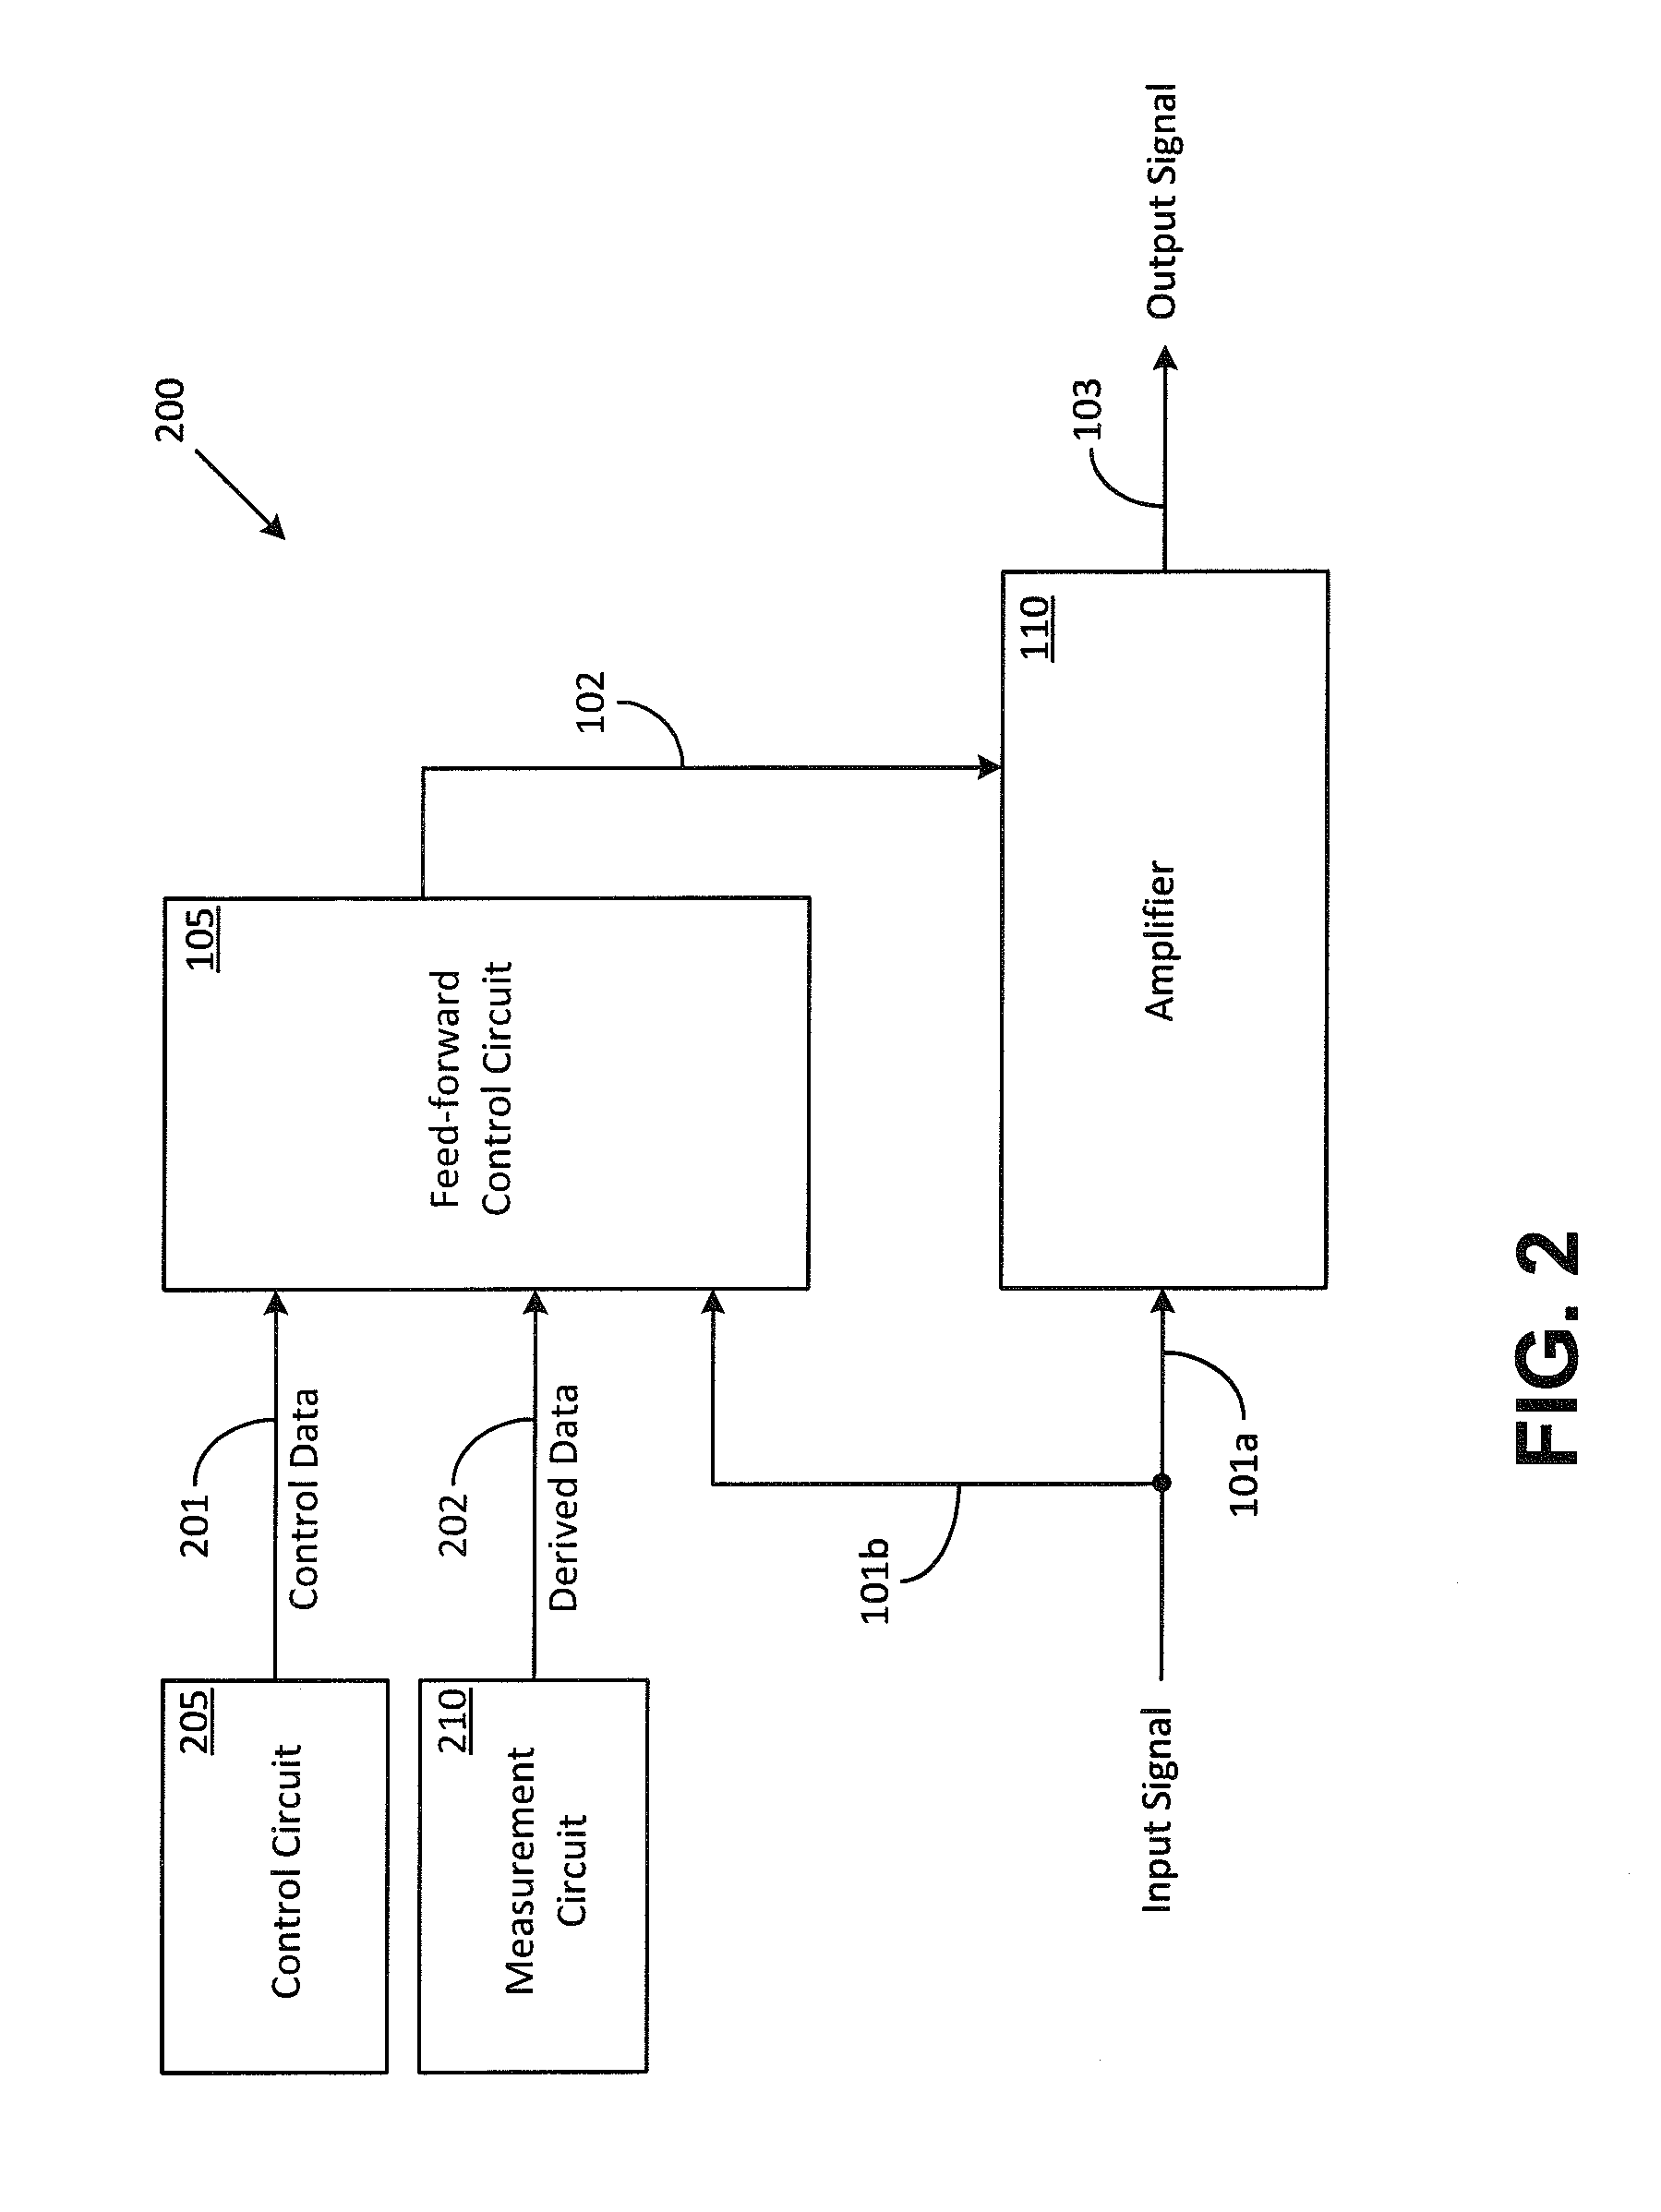 Systems and Methods for Optimizing Amplifier Operations